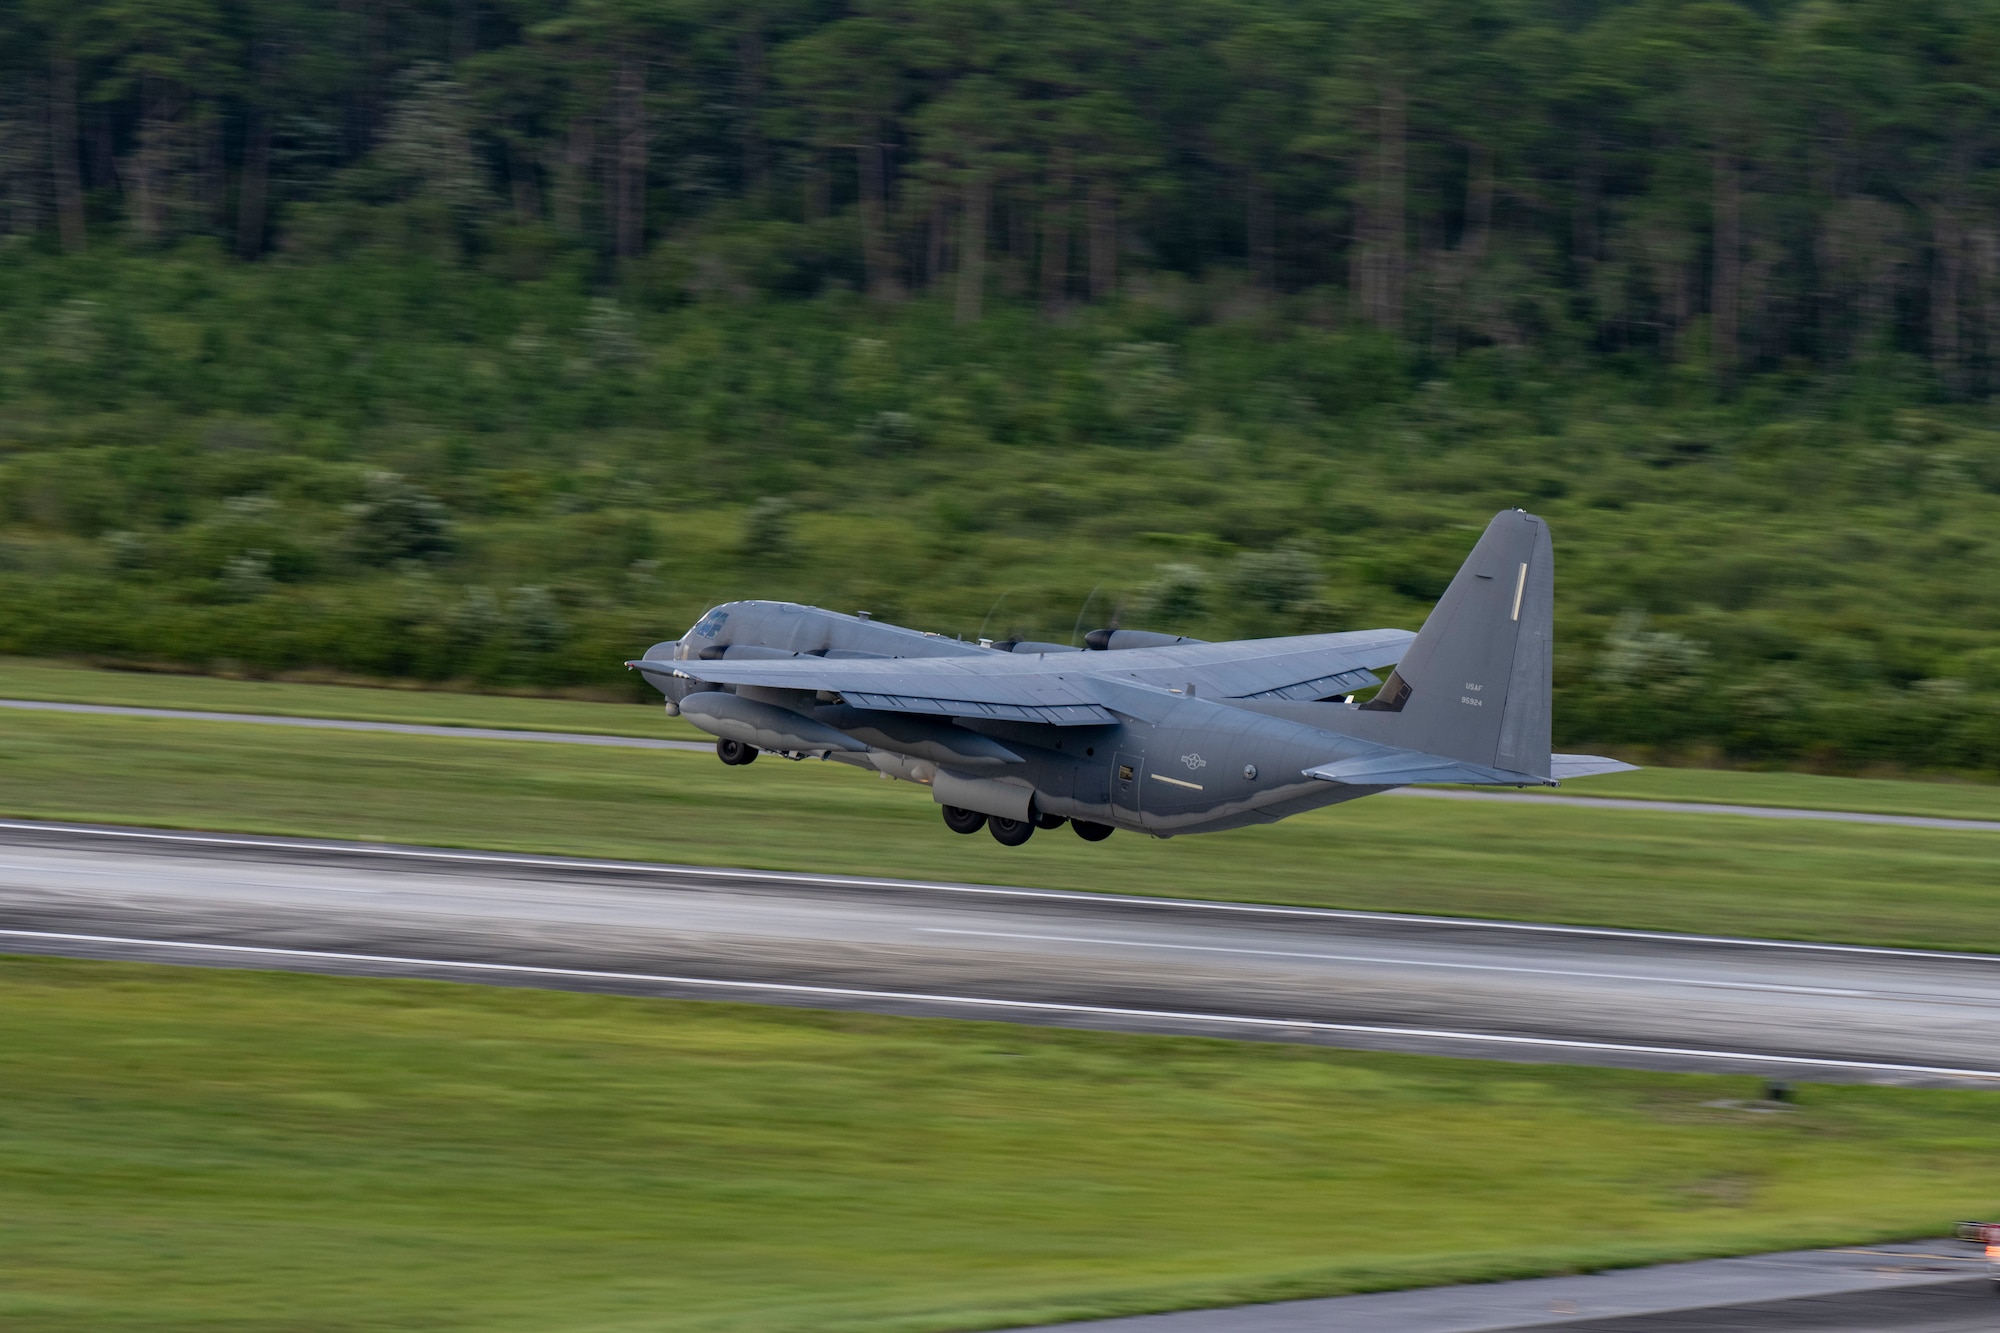 An MC-130J Commando II aircraft from the 1st Special Operations Wing takes off from Hurlburt Field, Florida, Jul. 6, 2023. The 1st Special Operation Wing, especially postured for rapid intervention in any crisis or conflict, launched two MC-130Js in support of U.S. Southern Command to enhance collective readiness, capability and contribute to regional security in the Western Hemisphere